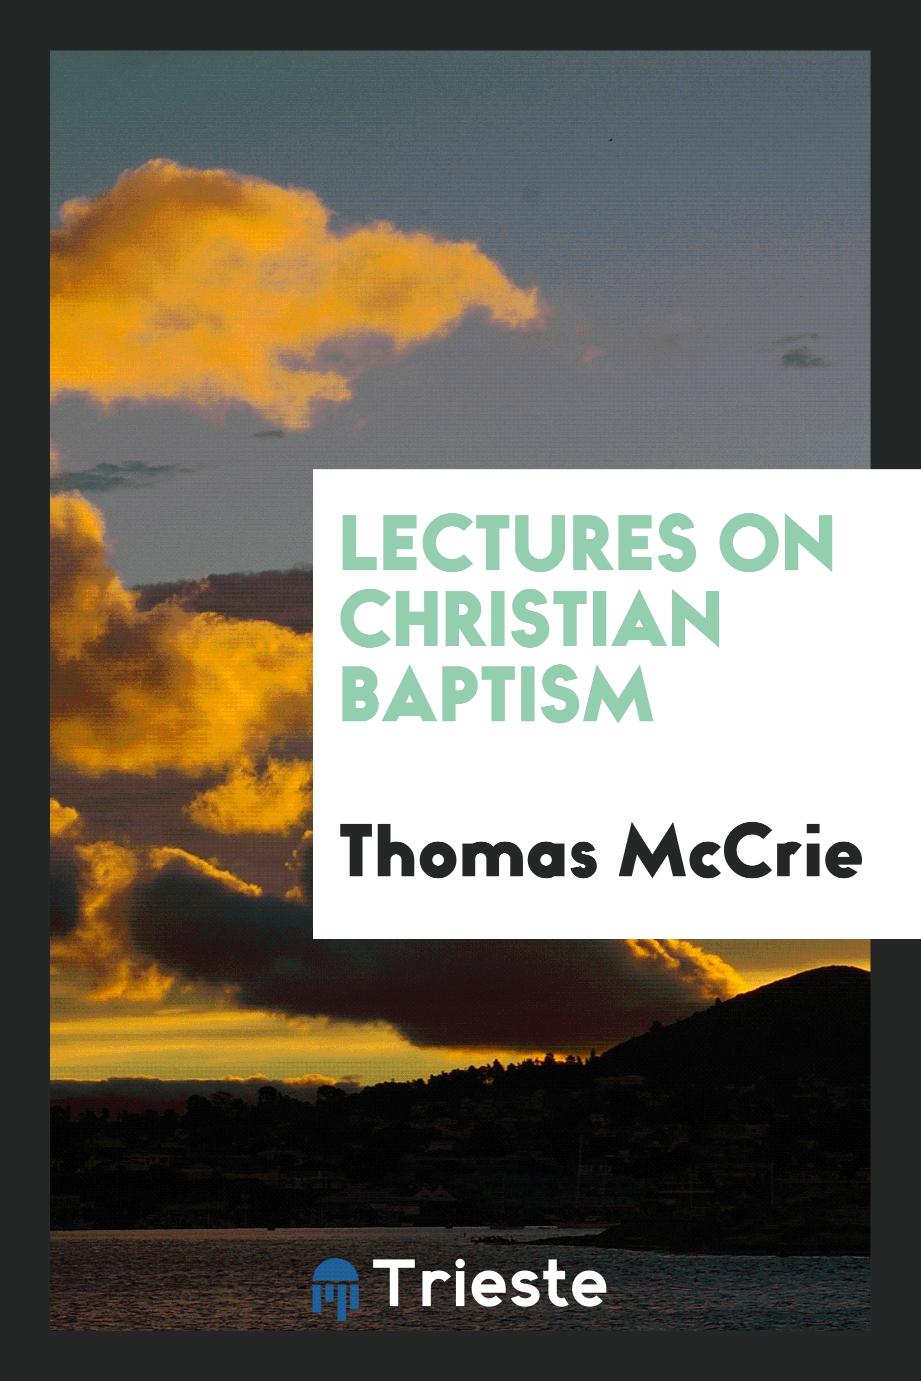 Lectures on Christian baptism